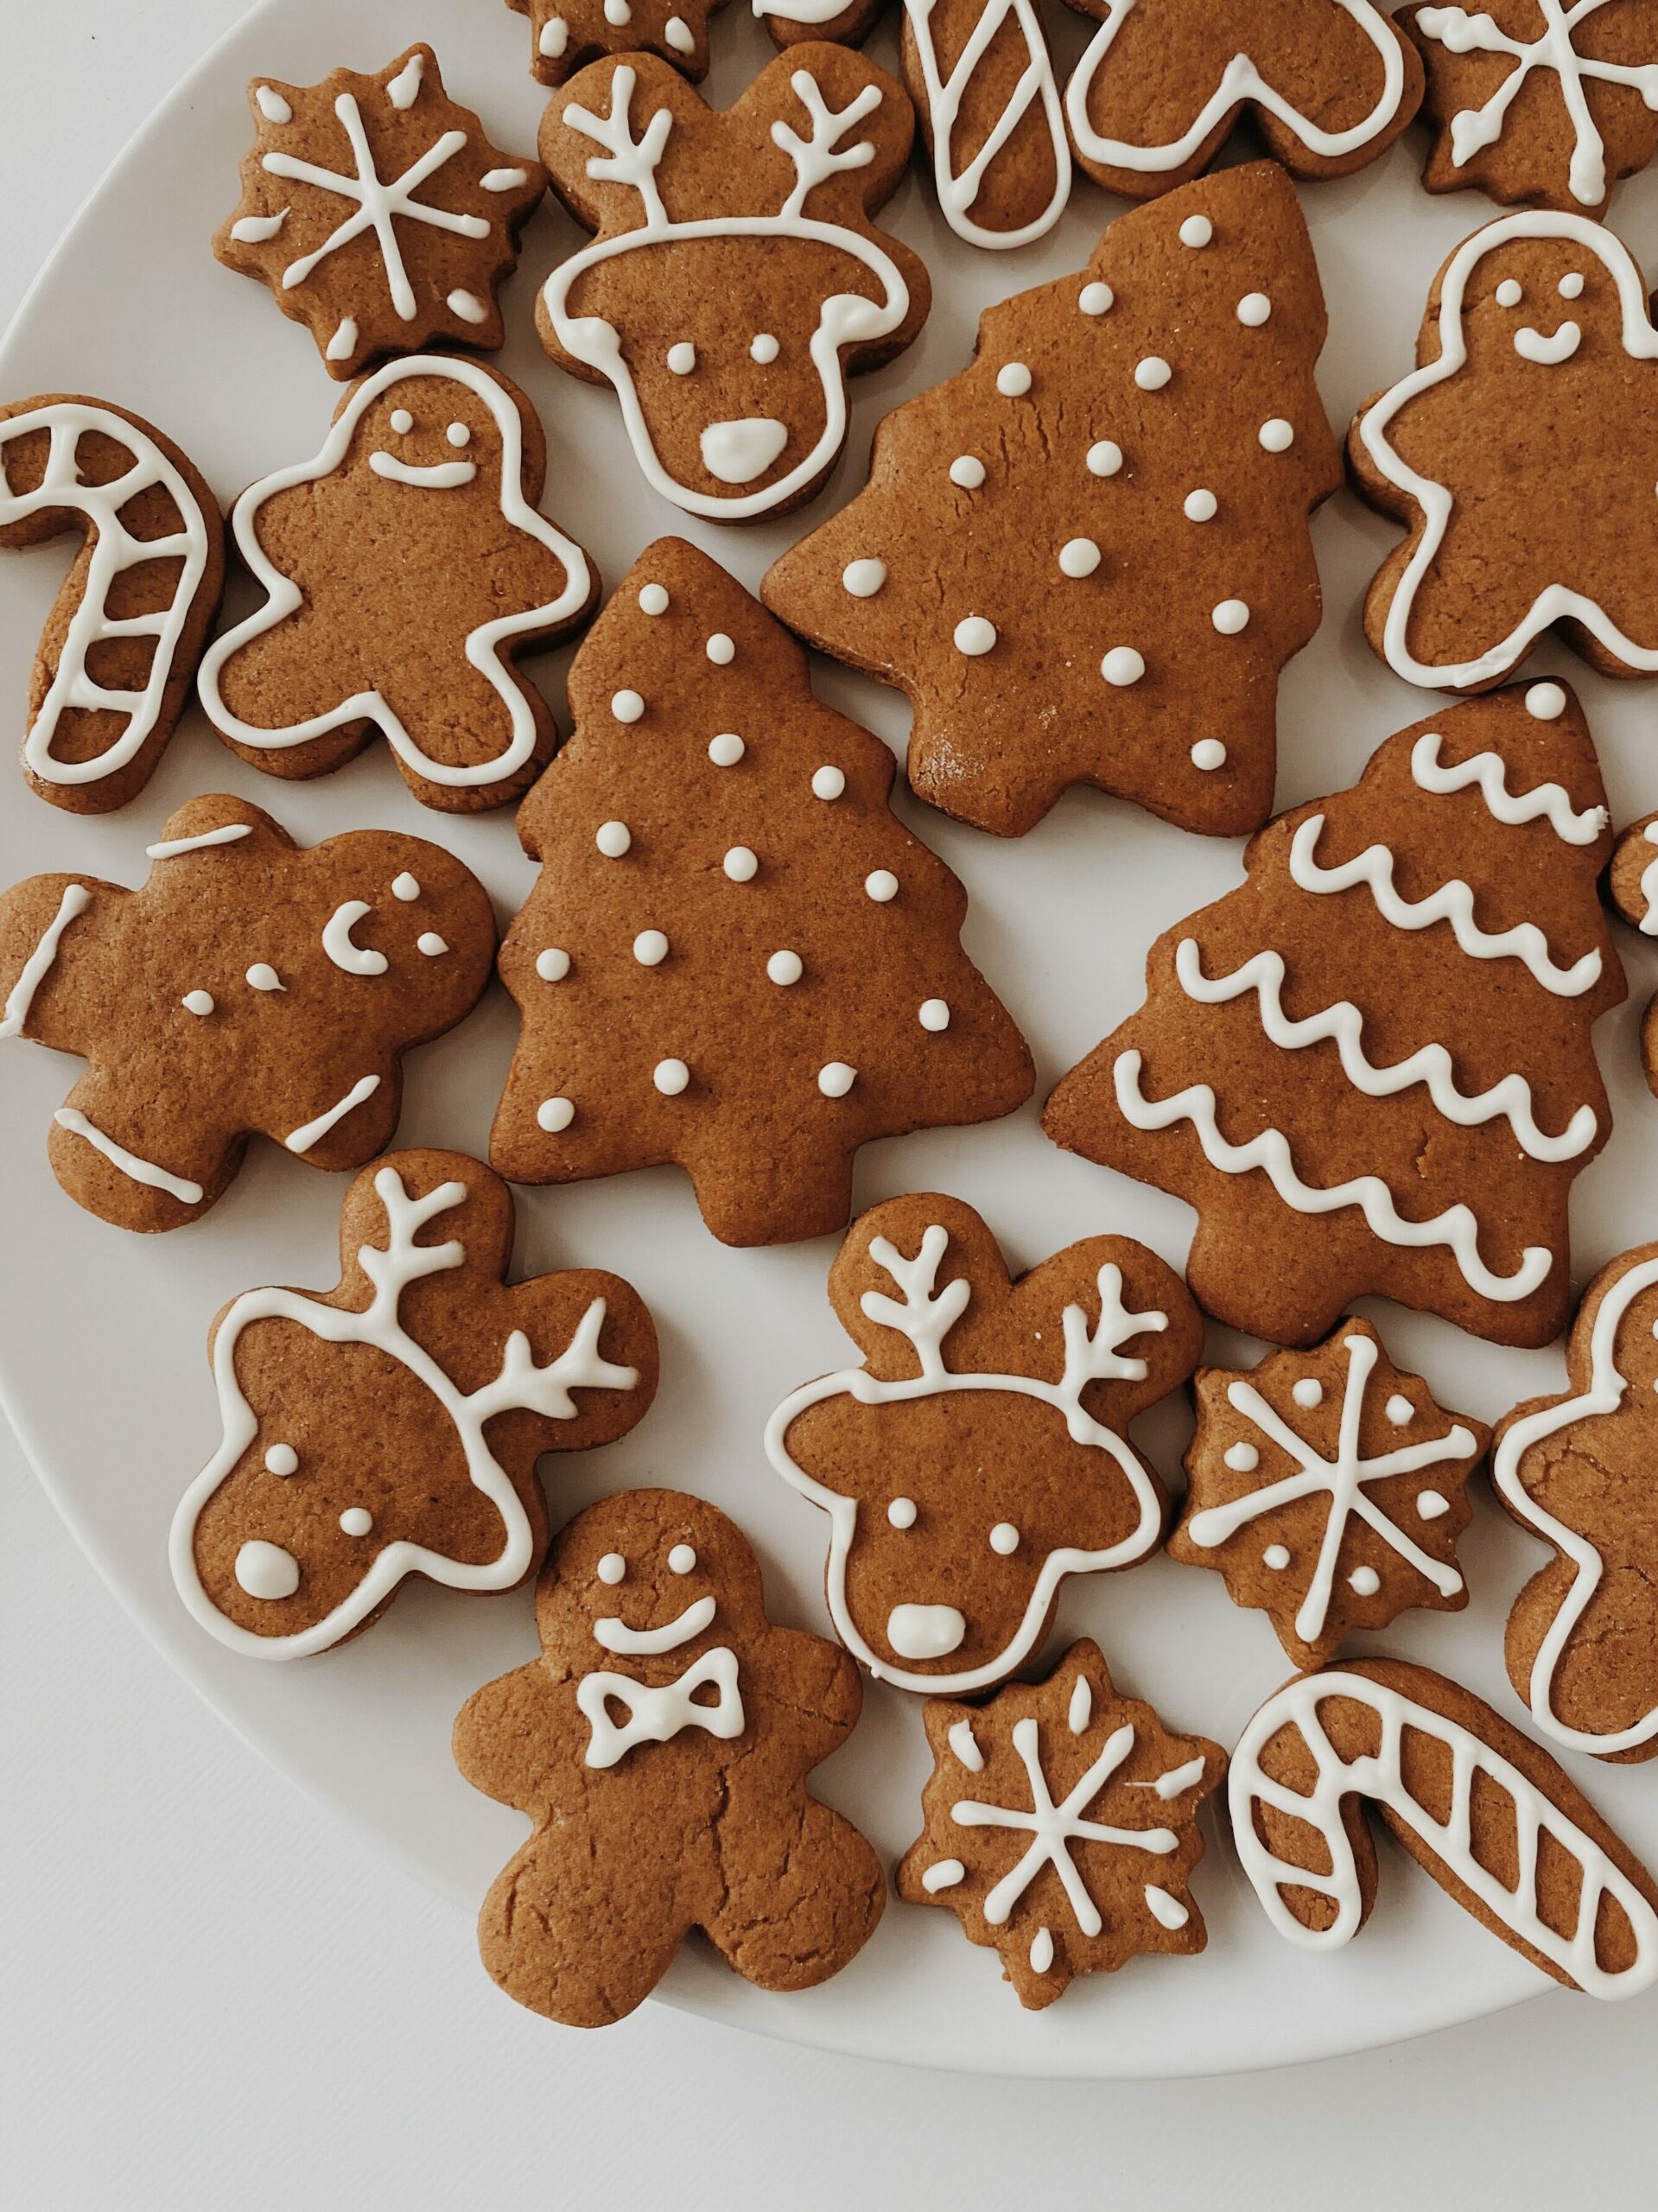 A plate of cookies with Christmas themed icing